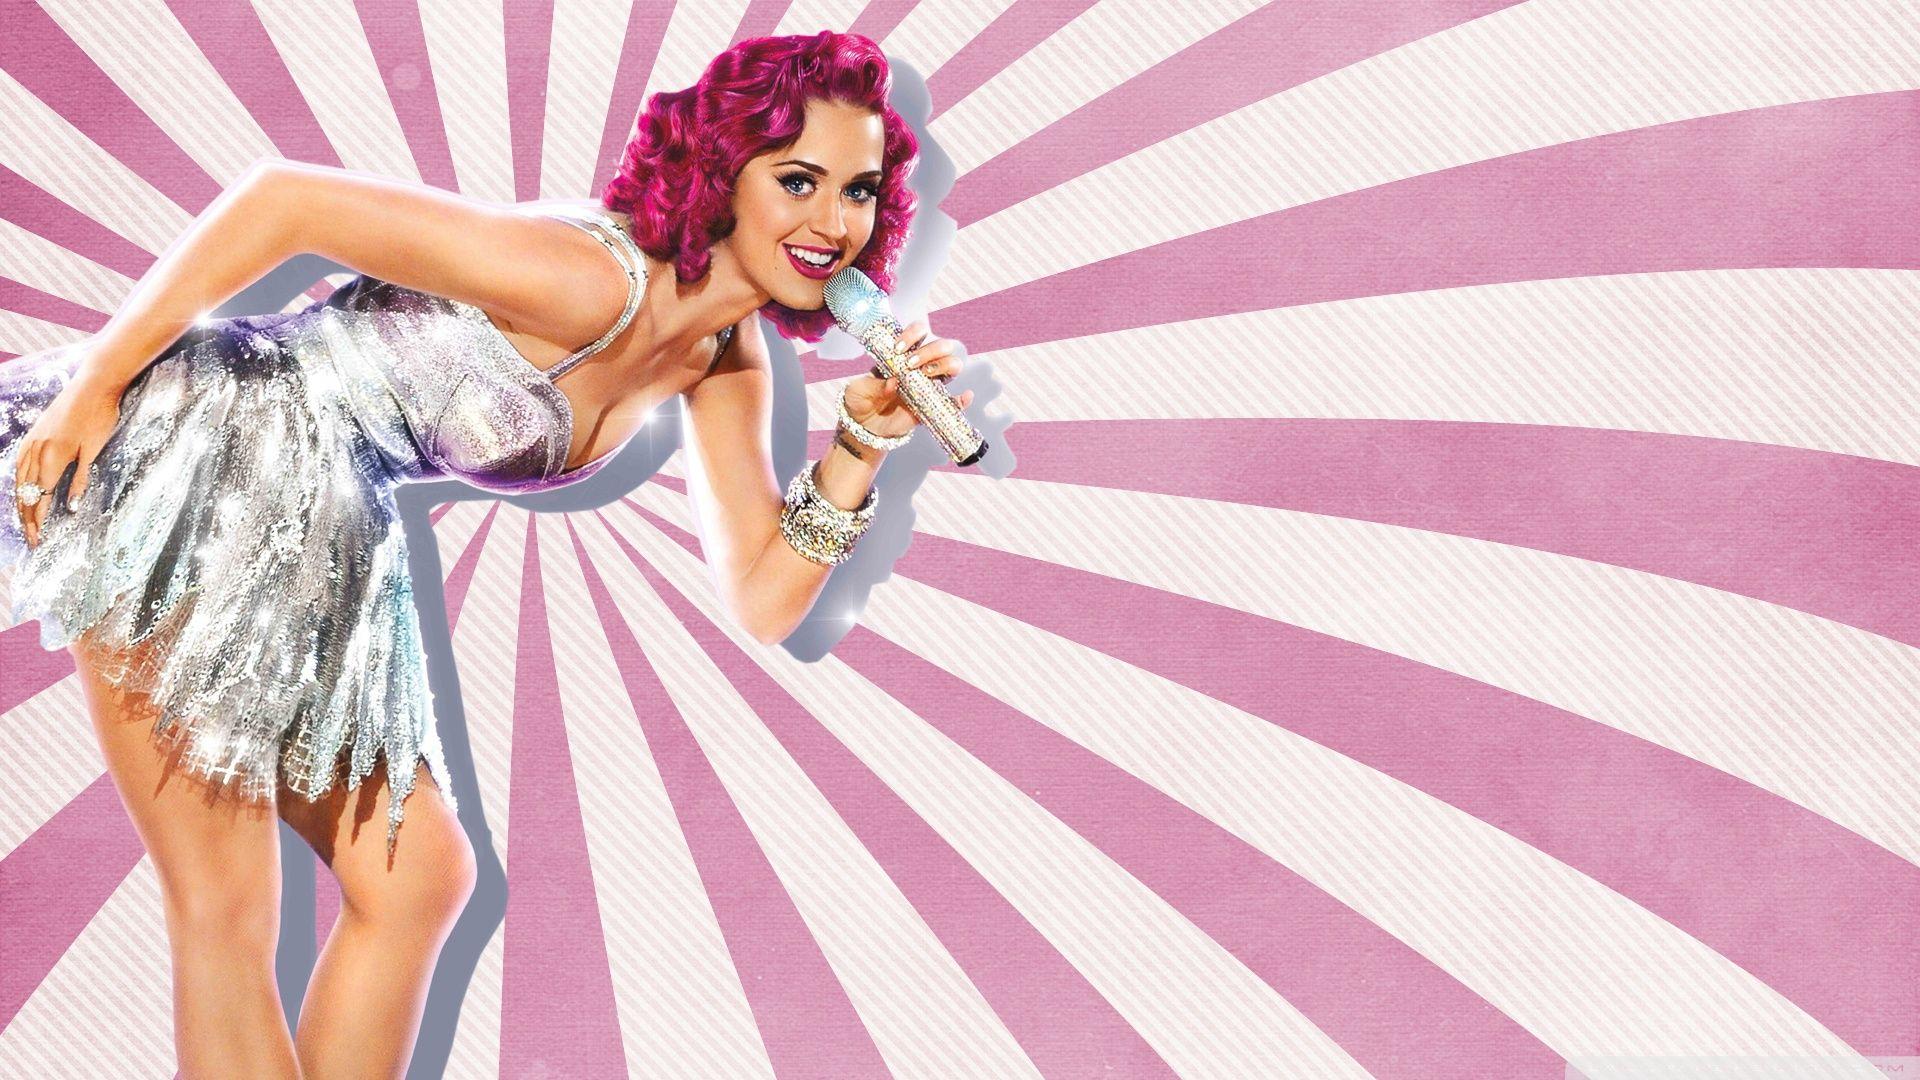 Vintage Pin Up Wallpapers - Wallpaper Cave